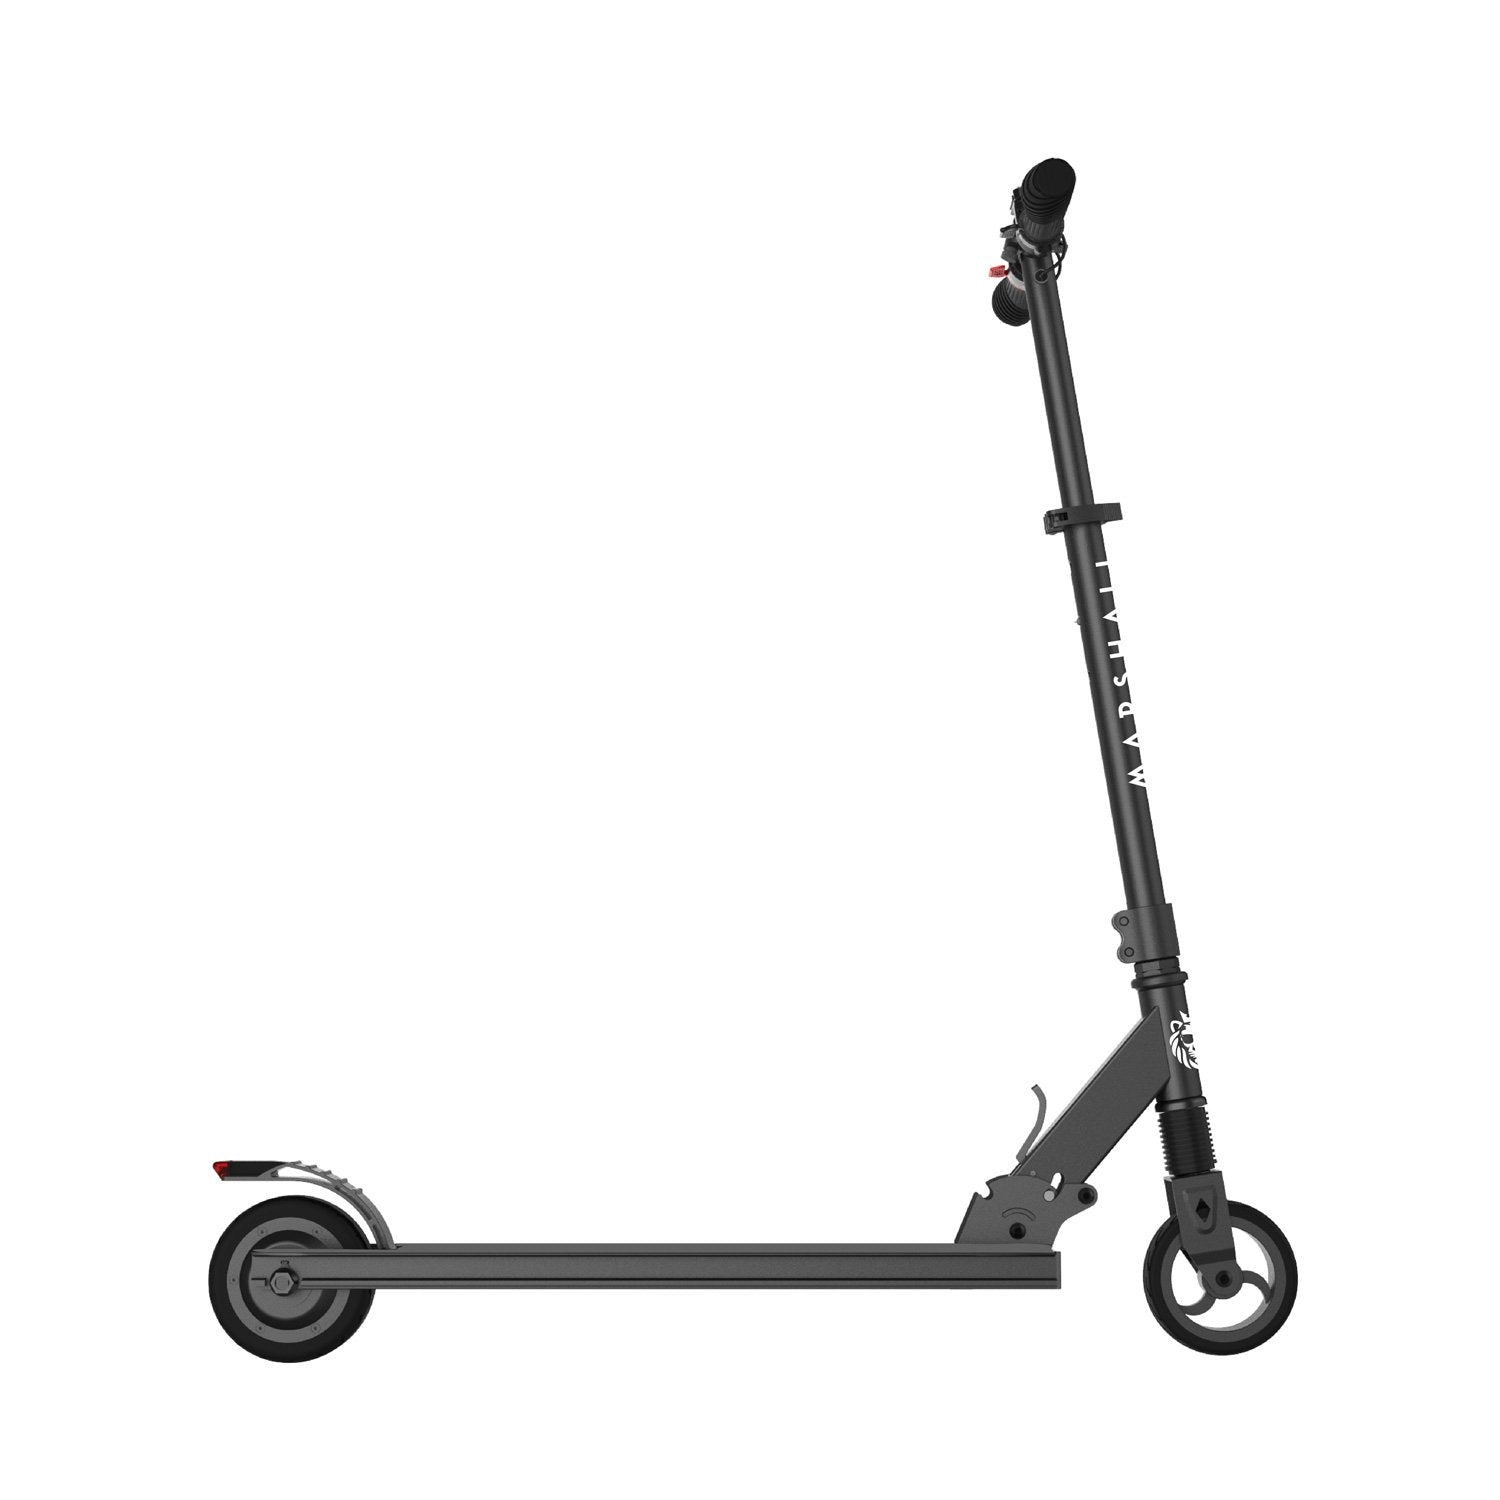 Marshall MA21 Electric Scooter